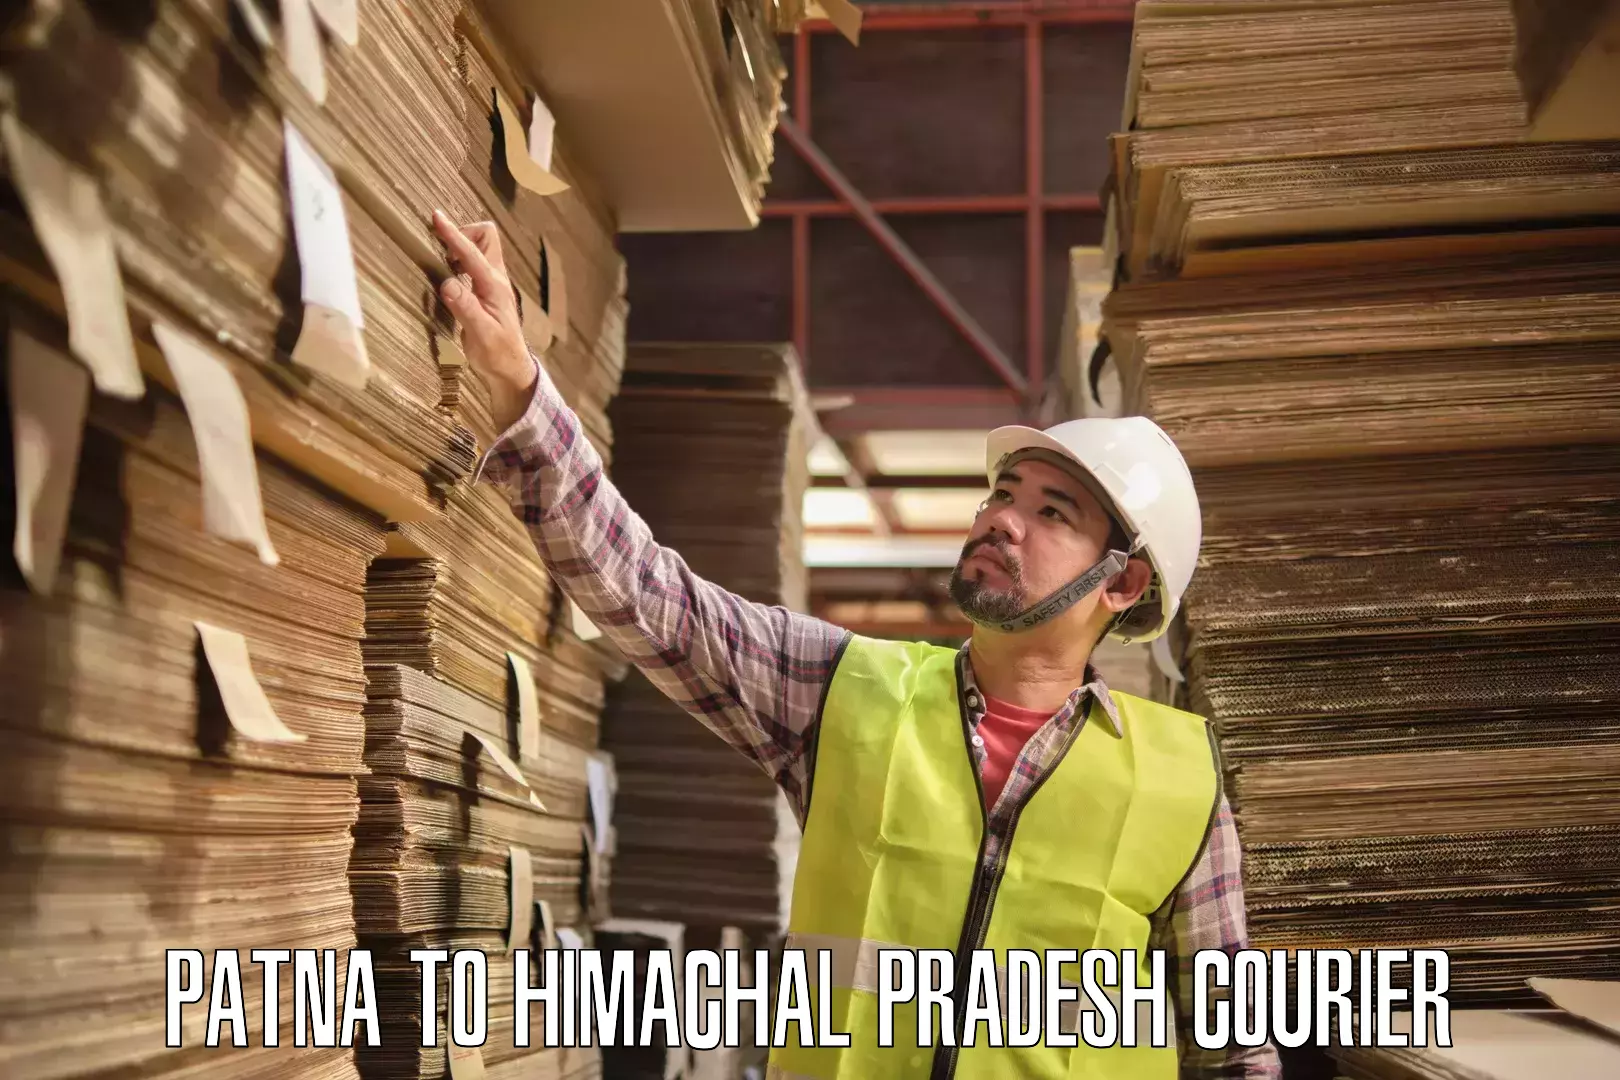 Sustainable shipping practices Patna to Himachal Pradesh